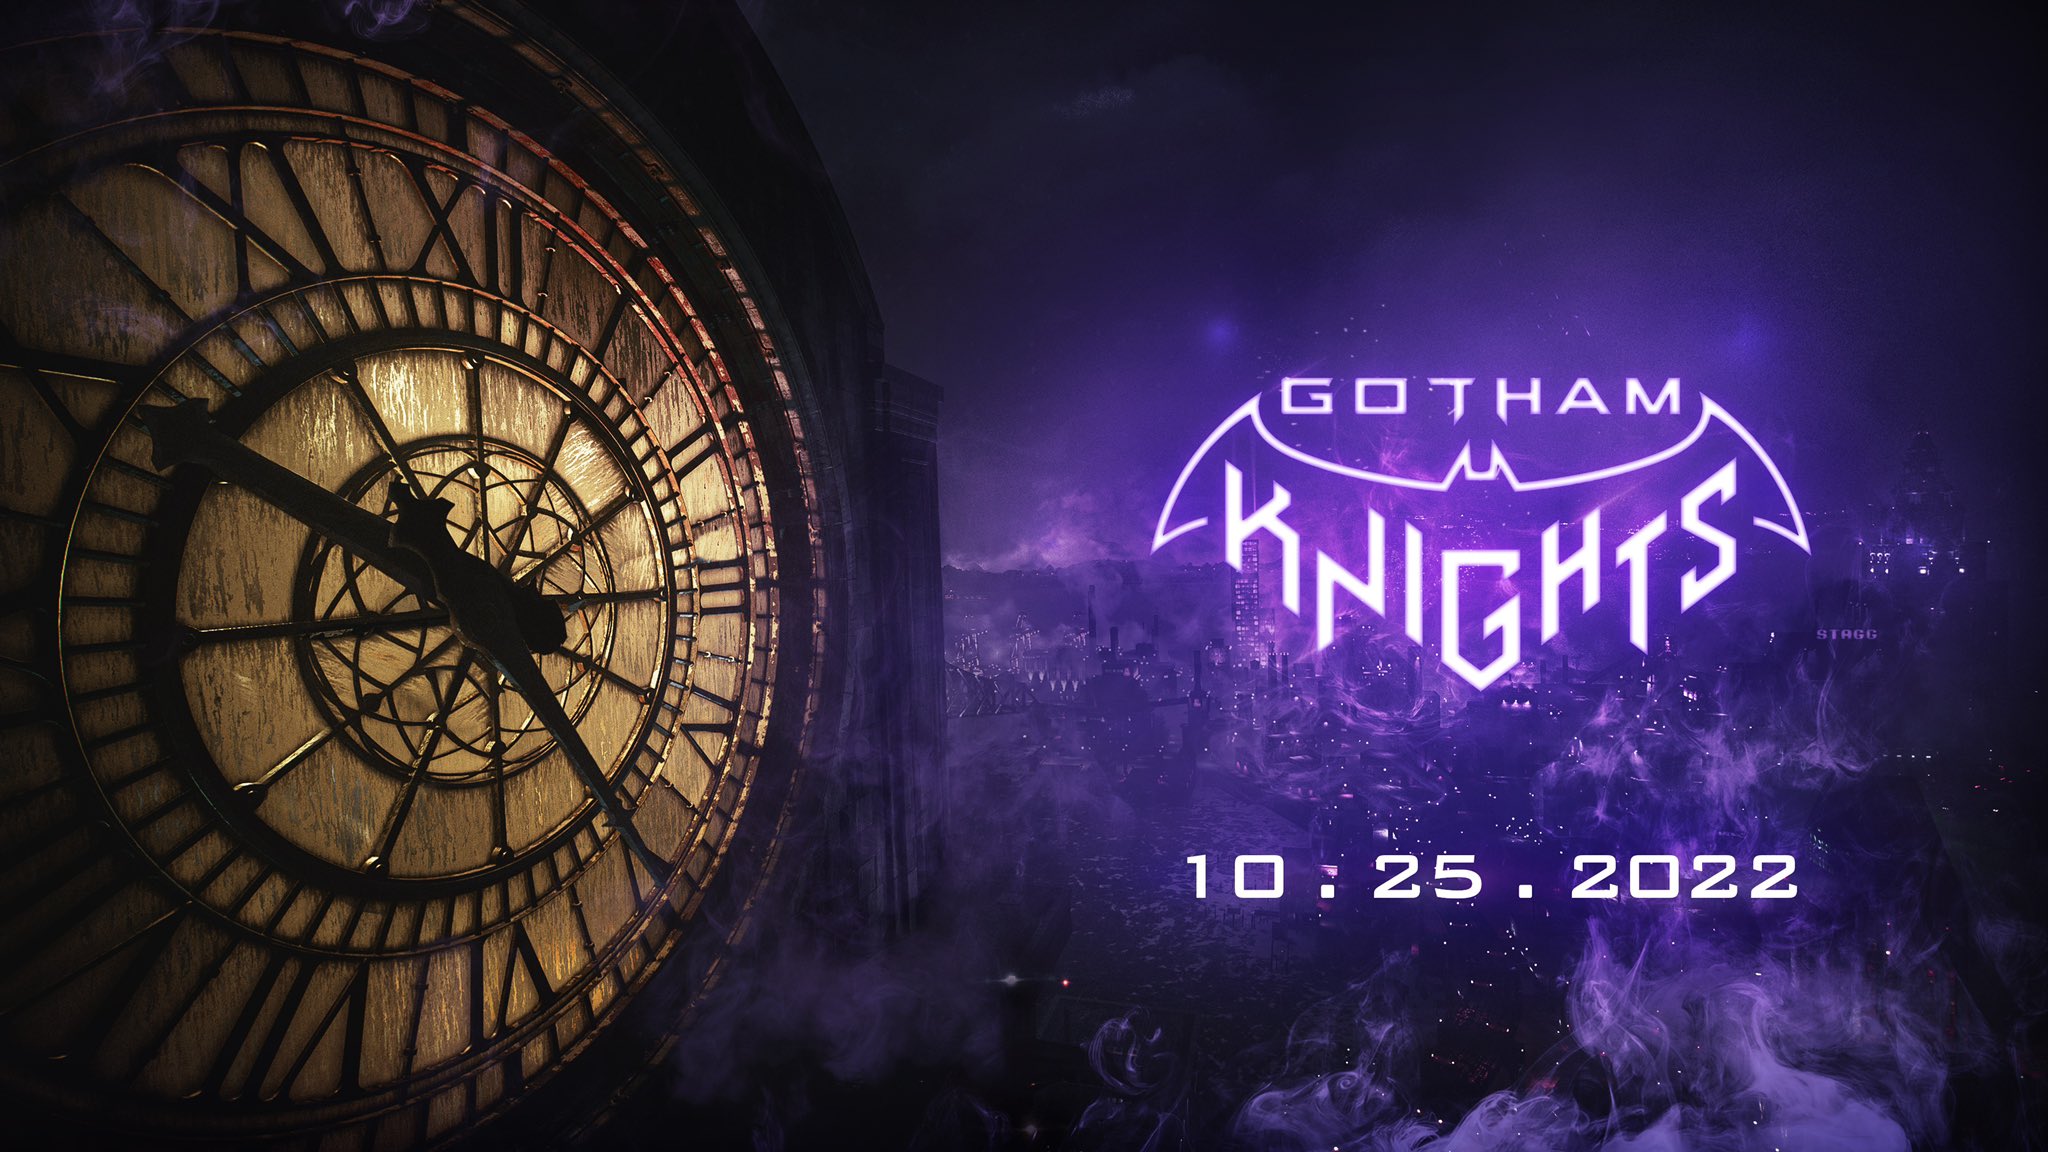 Gotham Knights officially releasing this year, for real, no joke(r)